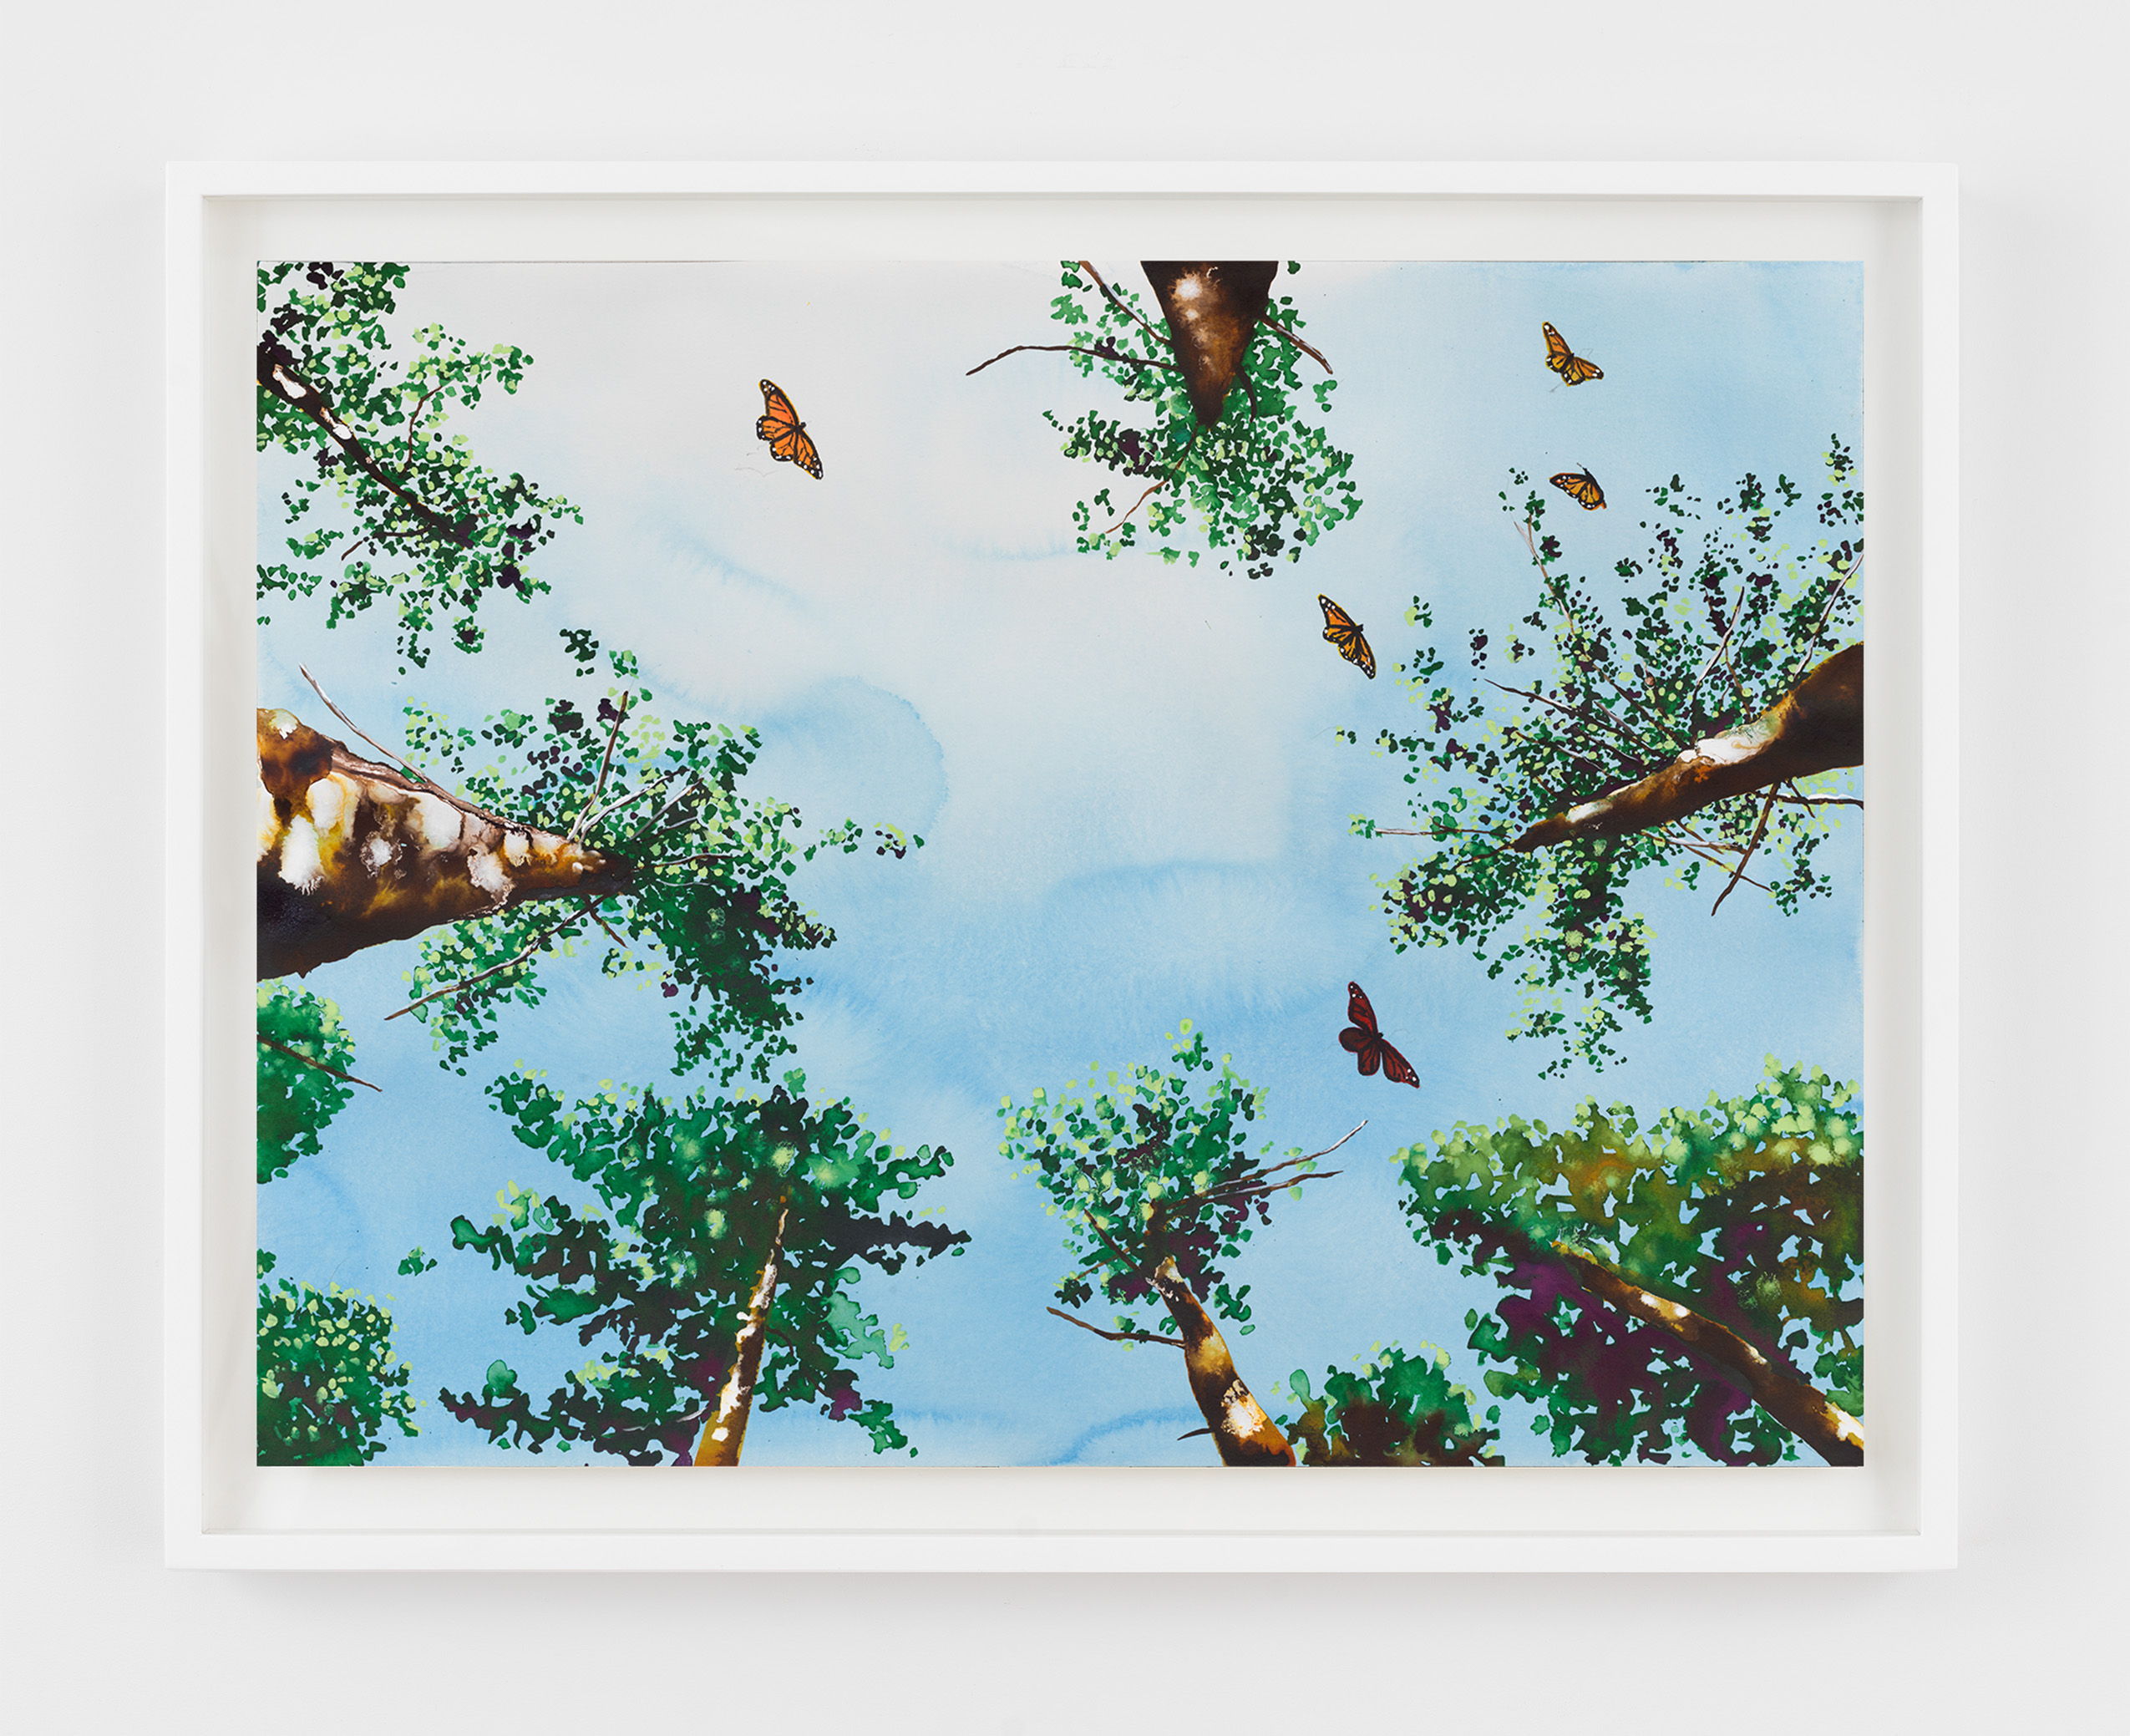 Alexis Rockman, Monarch Migration, 2022, Watercolor and acrylic on paper, 18 x 24 in.